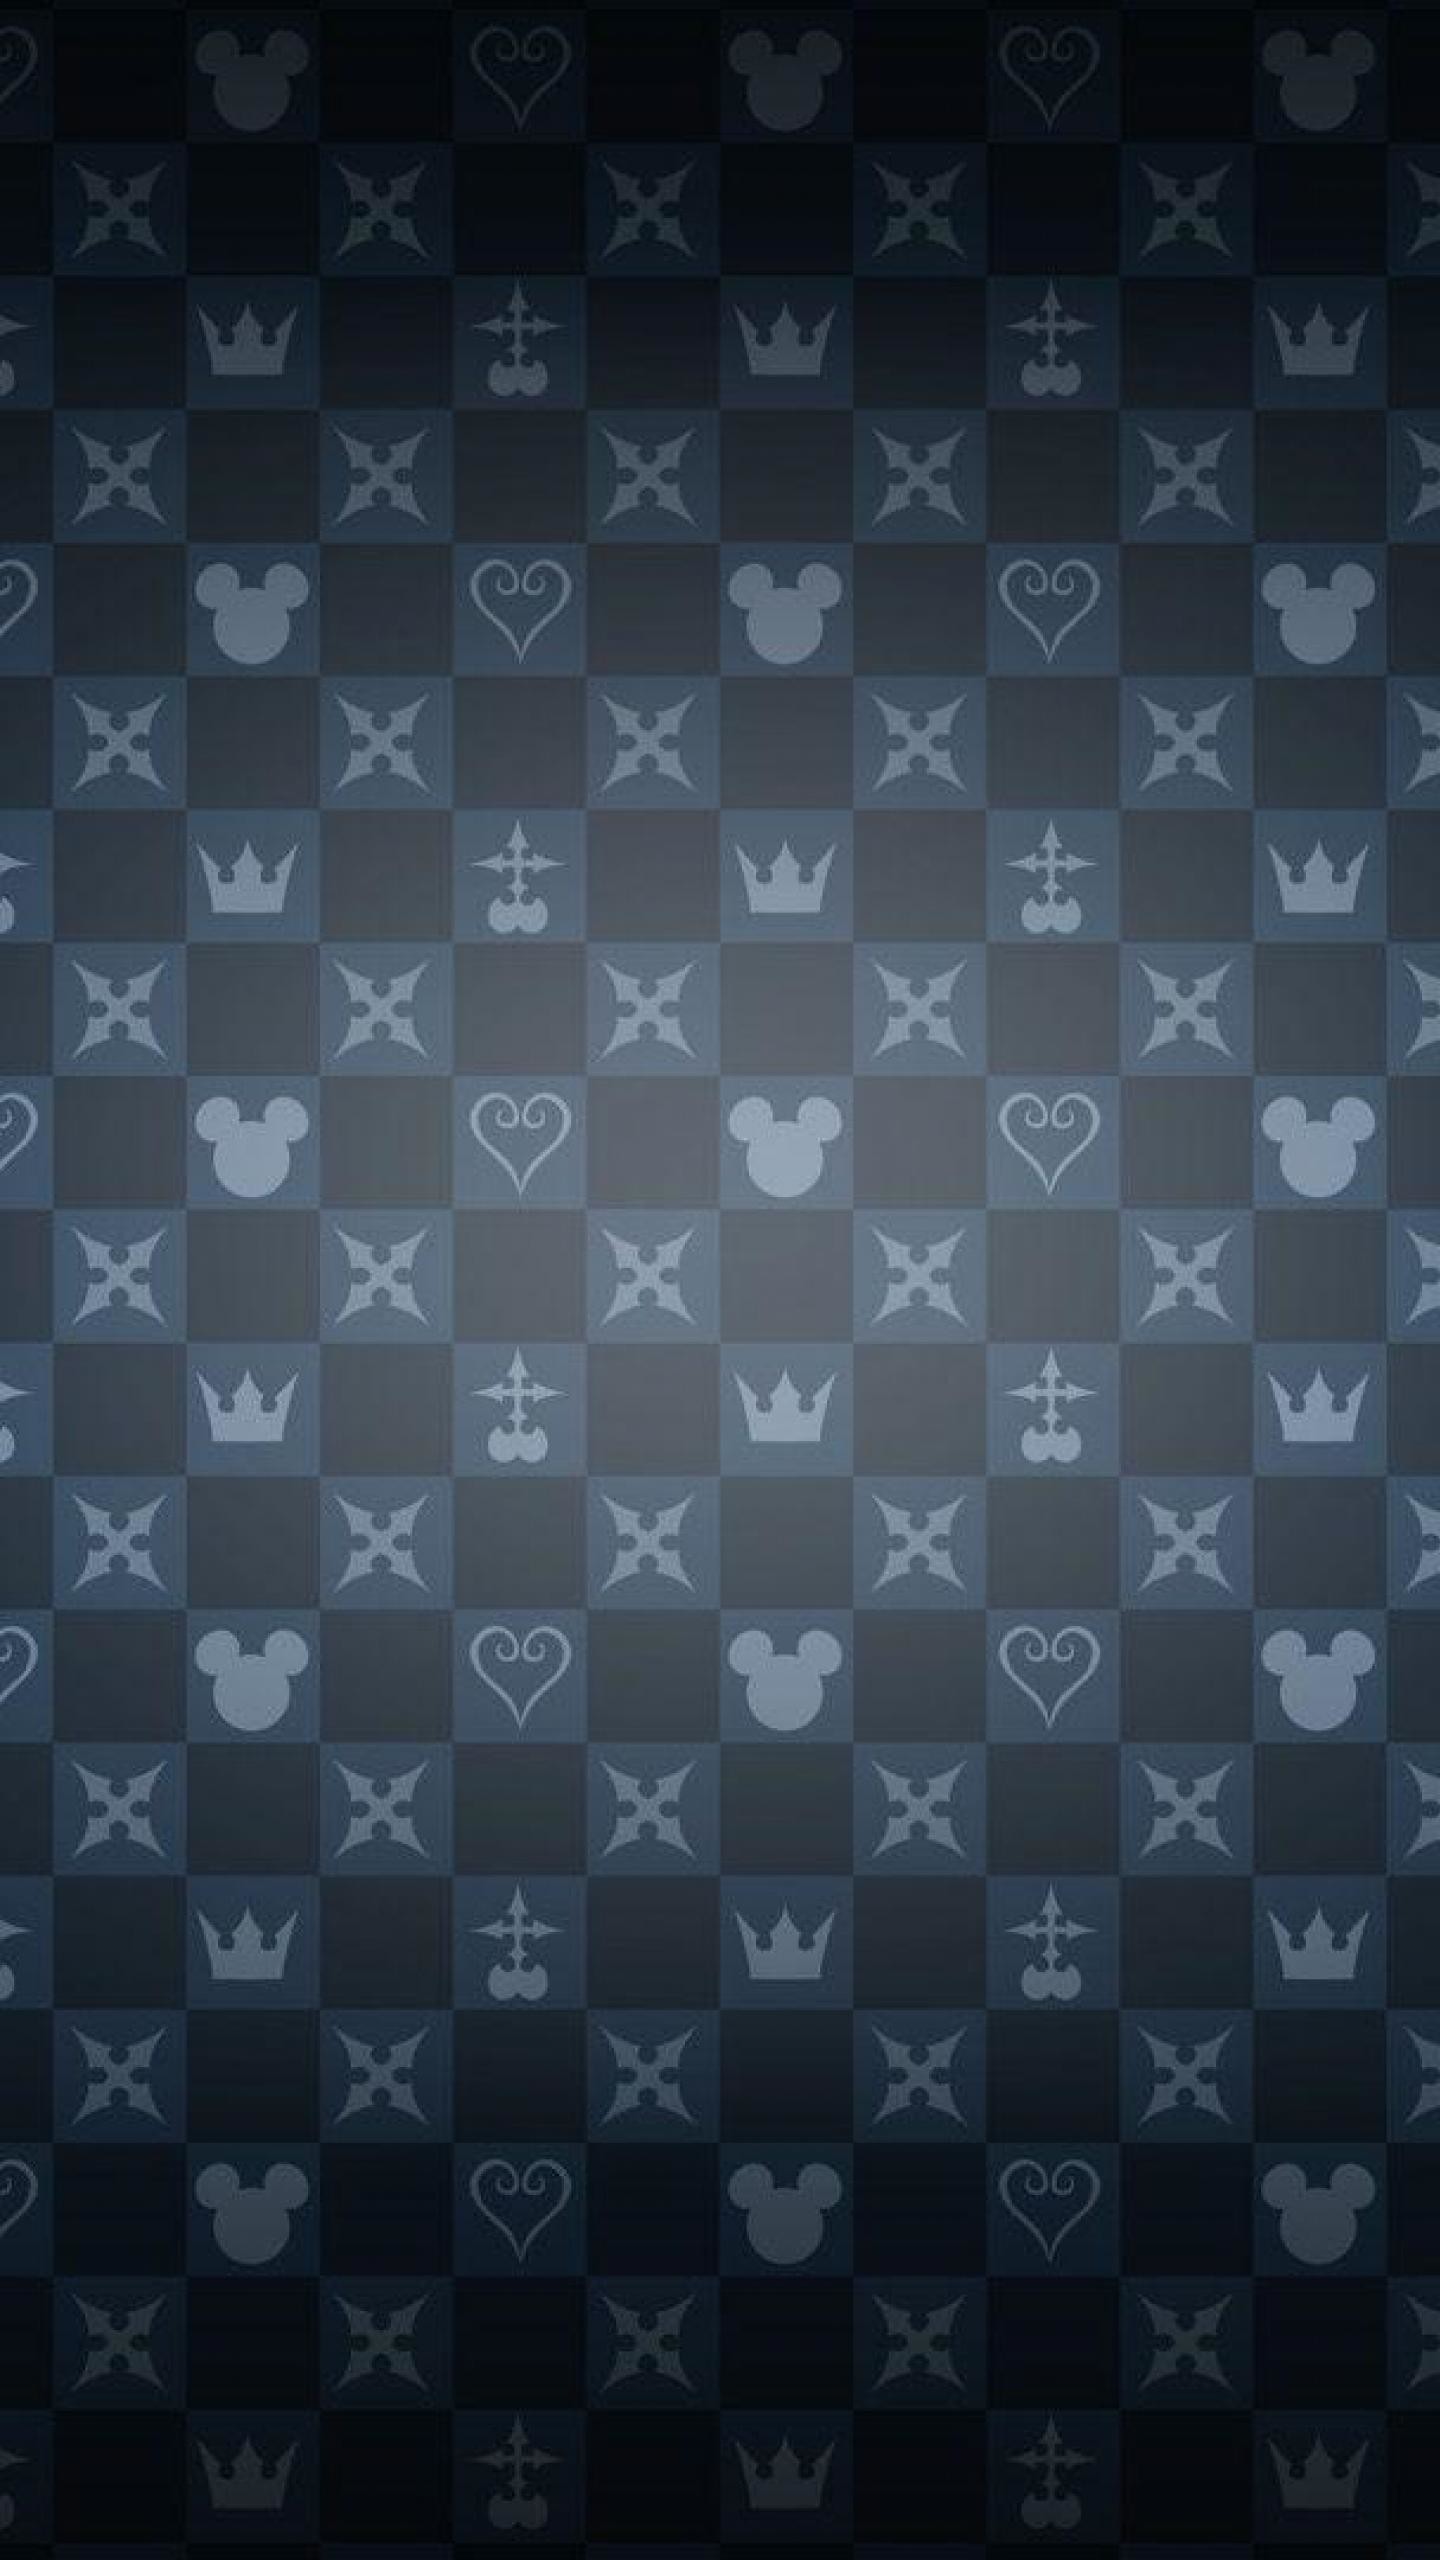 Kingdom Hearts Phone Live Wallpaper  DropBox Link in Comment  r KingdomHearts